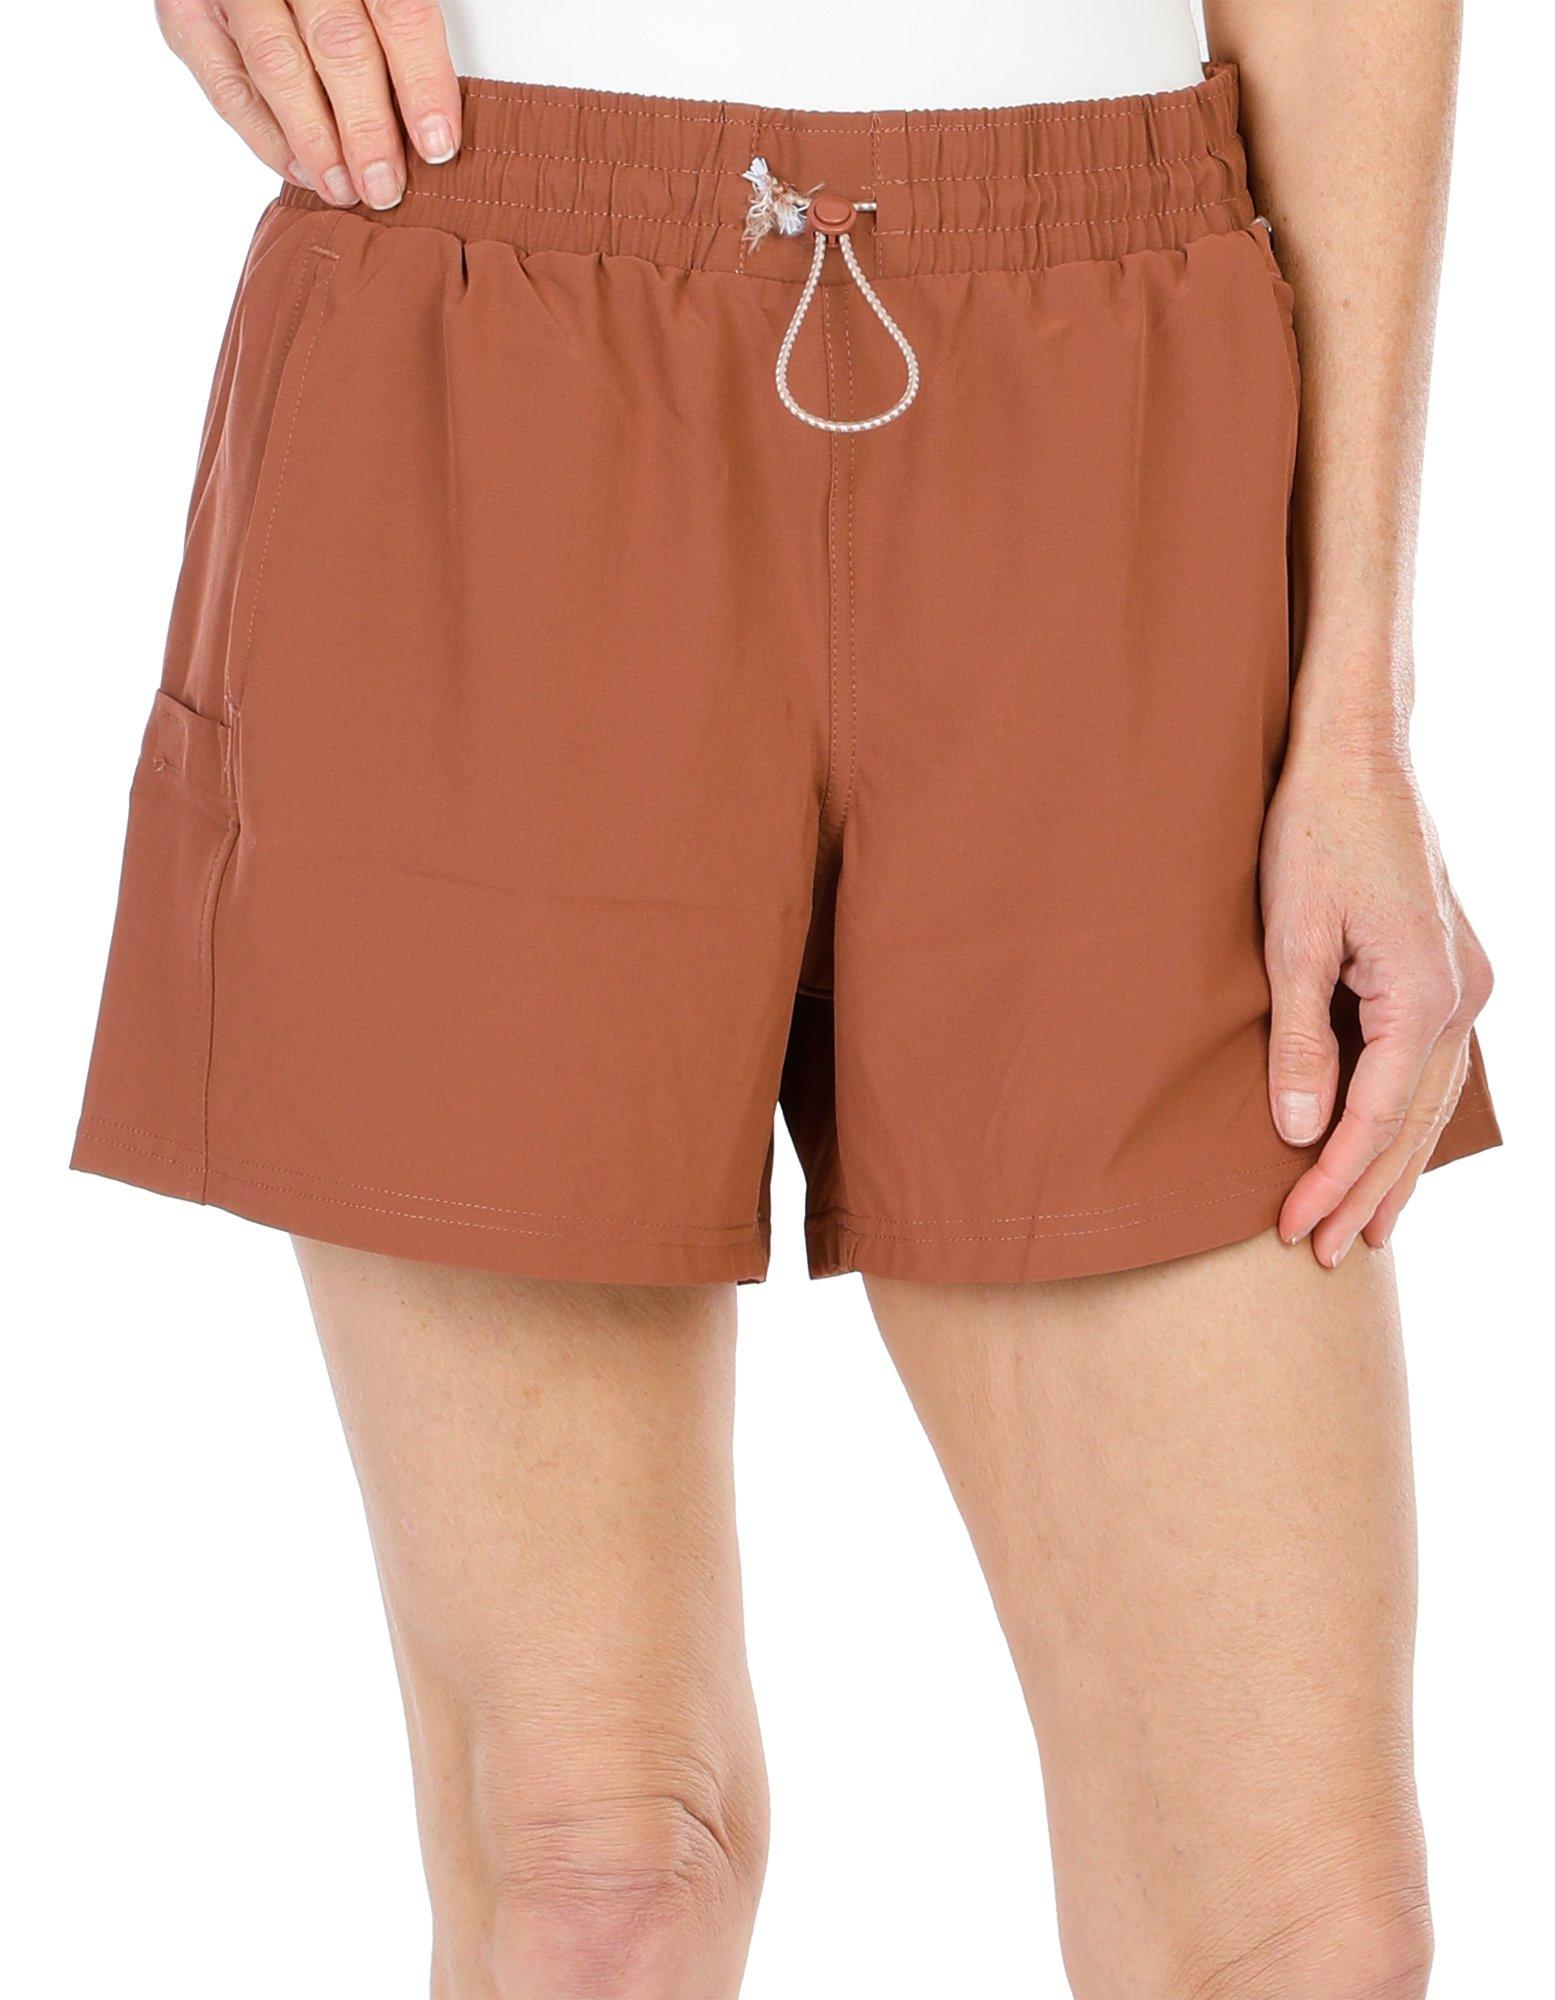 Women's Outdoor Solid Shorts